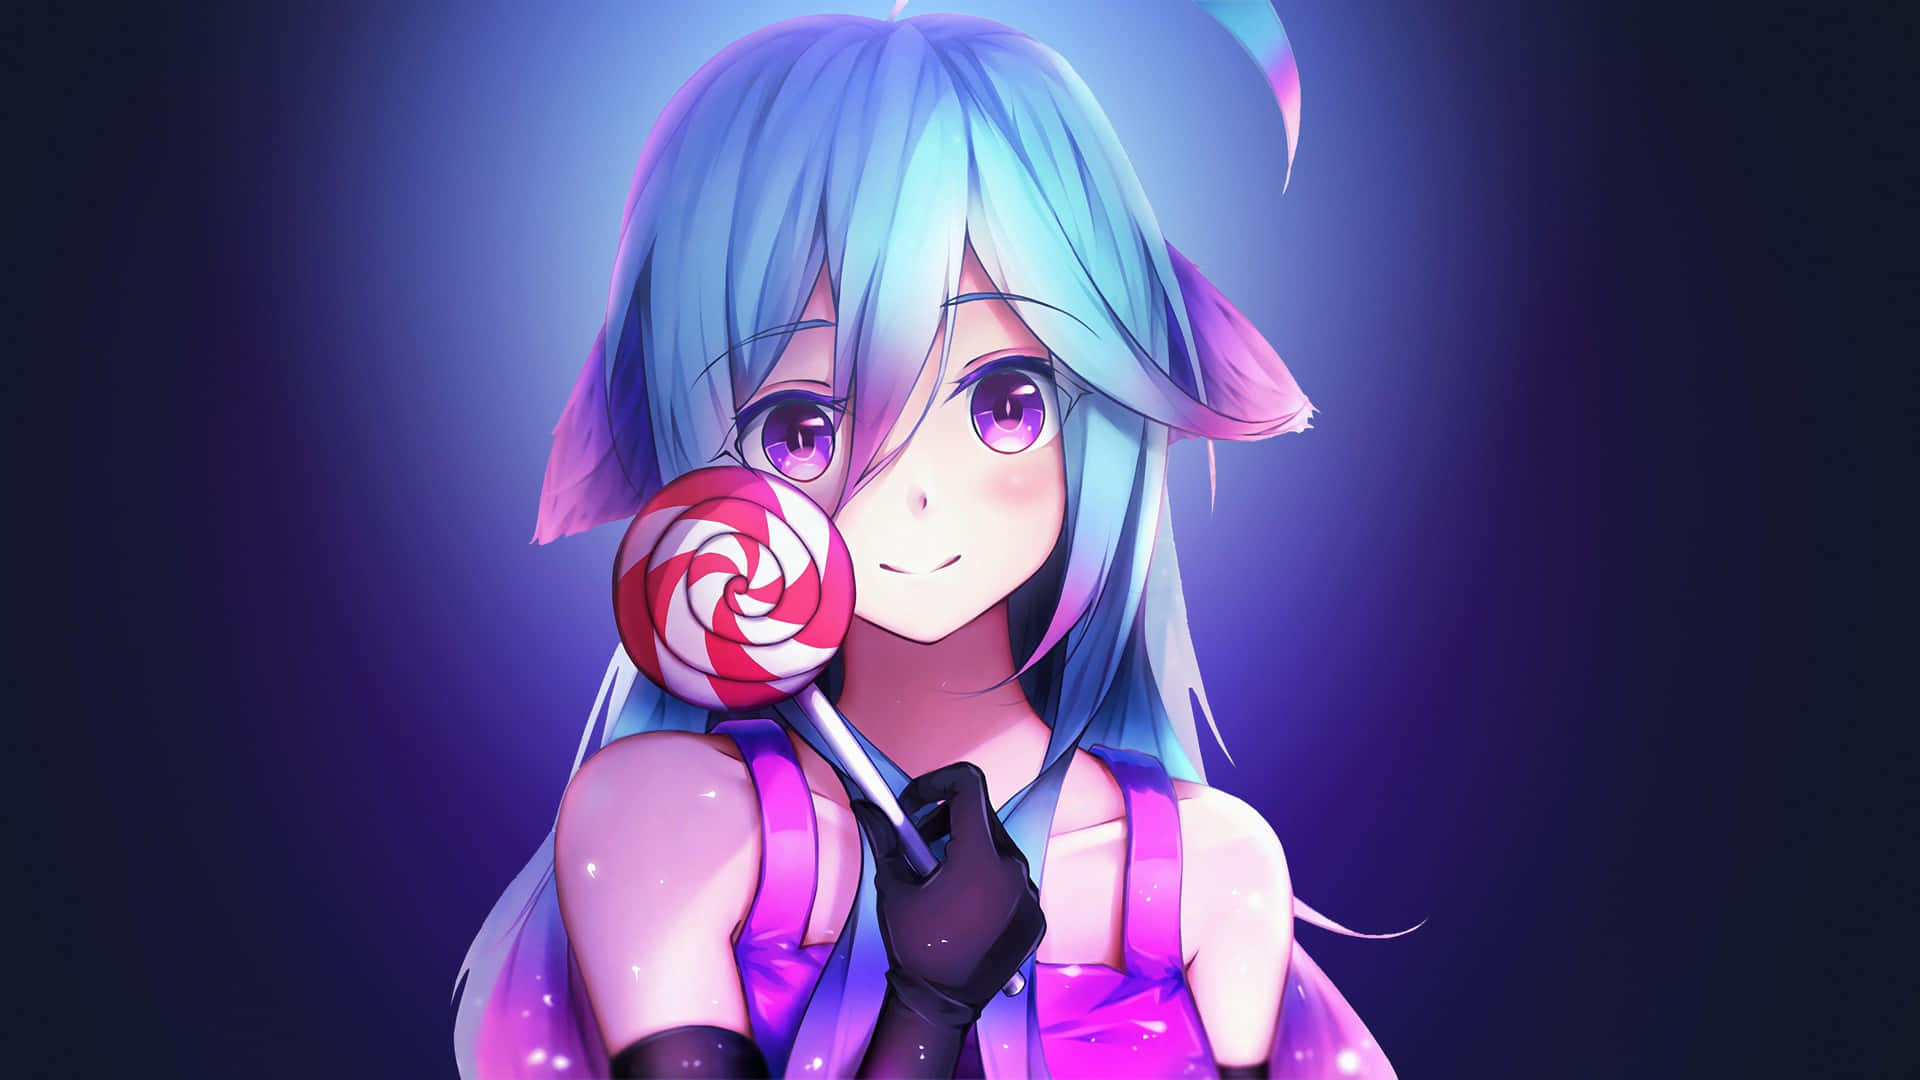 Blue Haired Anime Girl With Lollipop Wallpaper